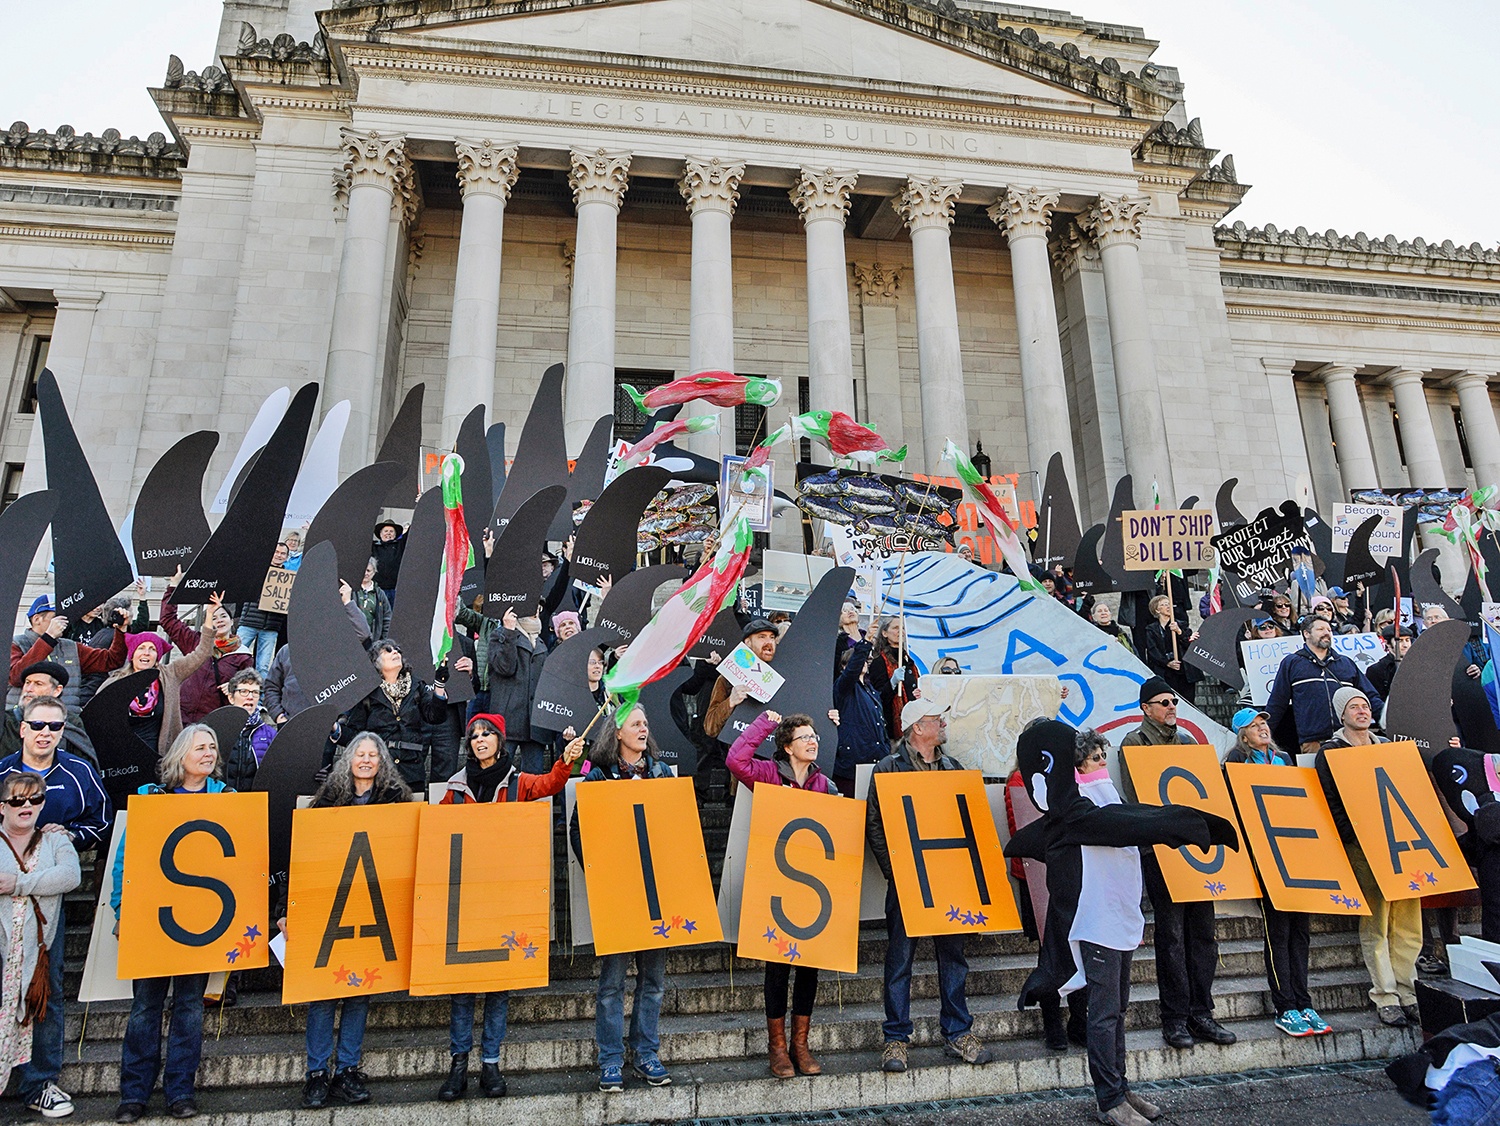 The Salish Sea Stands on Washington state’s capitol steps